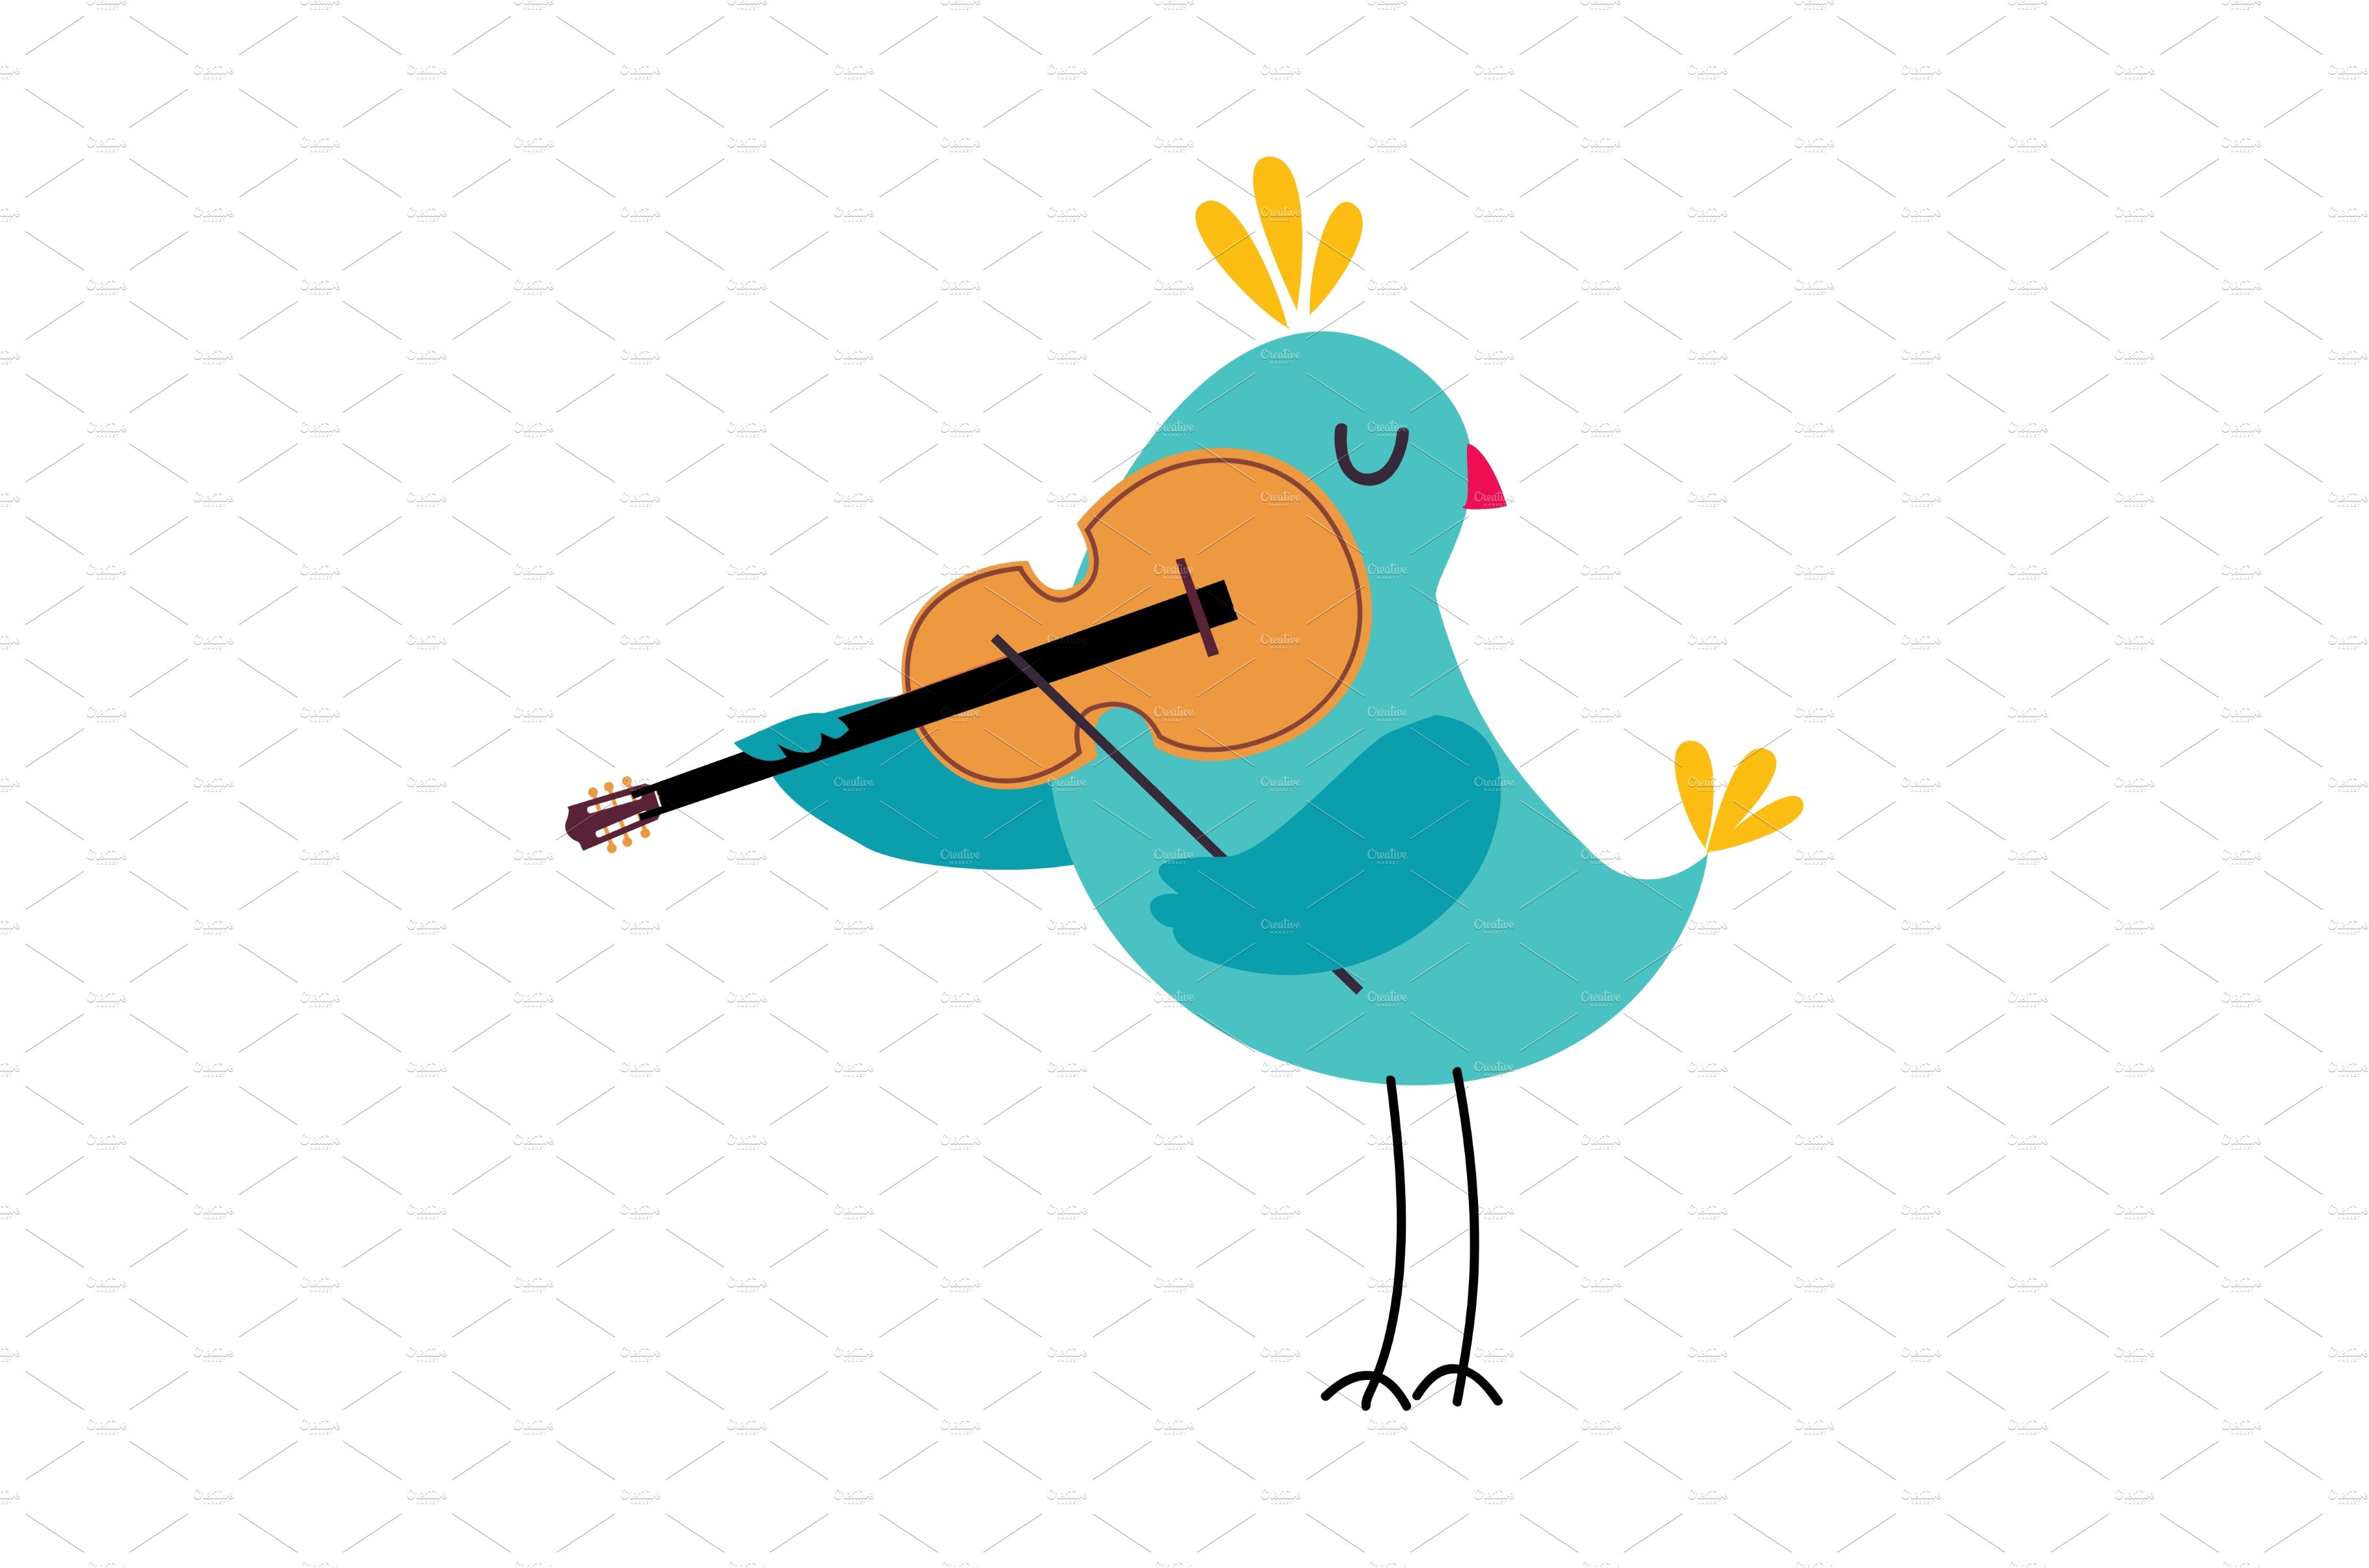 Funny Bird Character Playing Violin cover image.